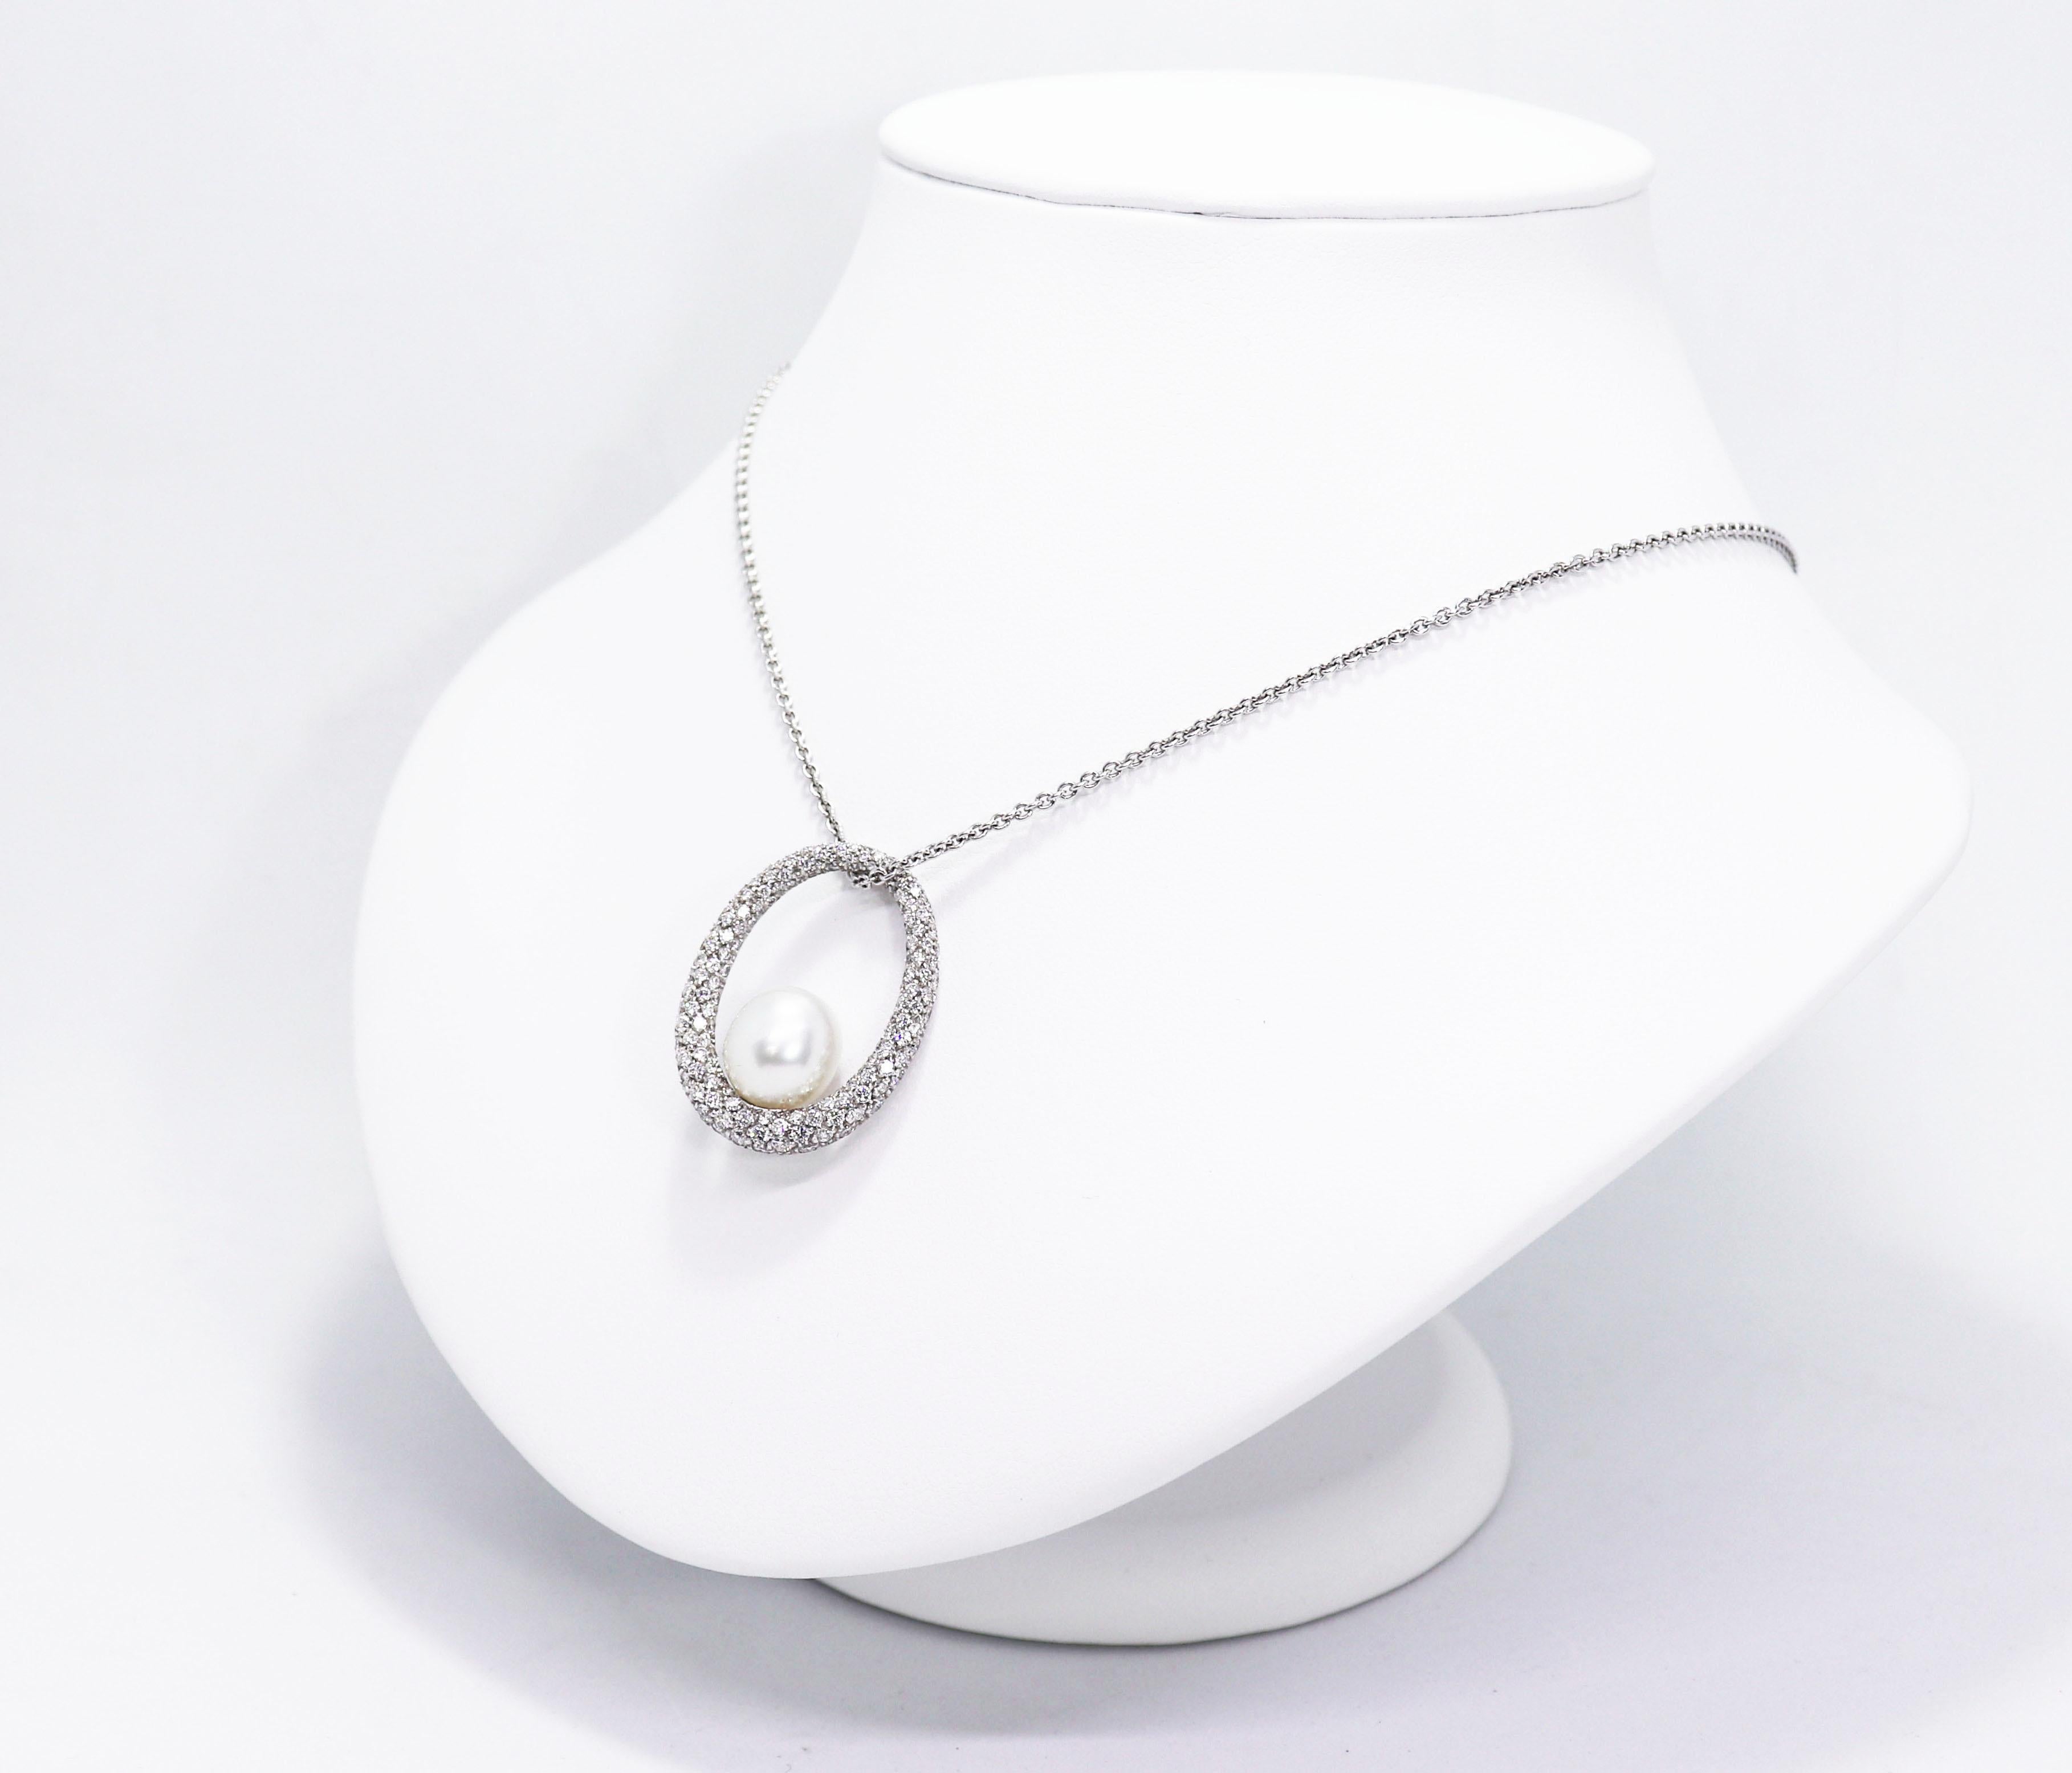 Elegant pendant featuring a beautiful cultured pearl measuring approximately 11x12mm sat in the centre of an oval 18 carat white gold mount, pavé set with approximately 3.00 carats of fine quality round brilliant cut diamonds. The pendant measures